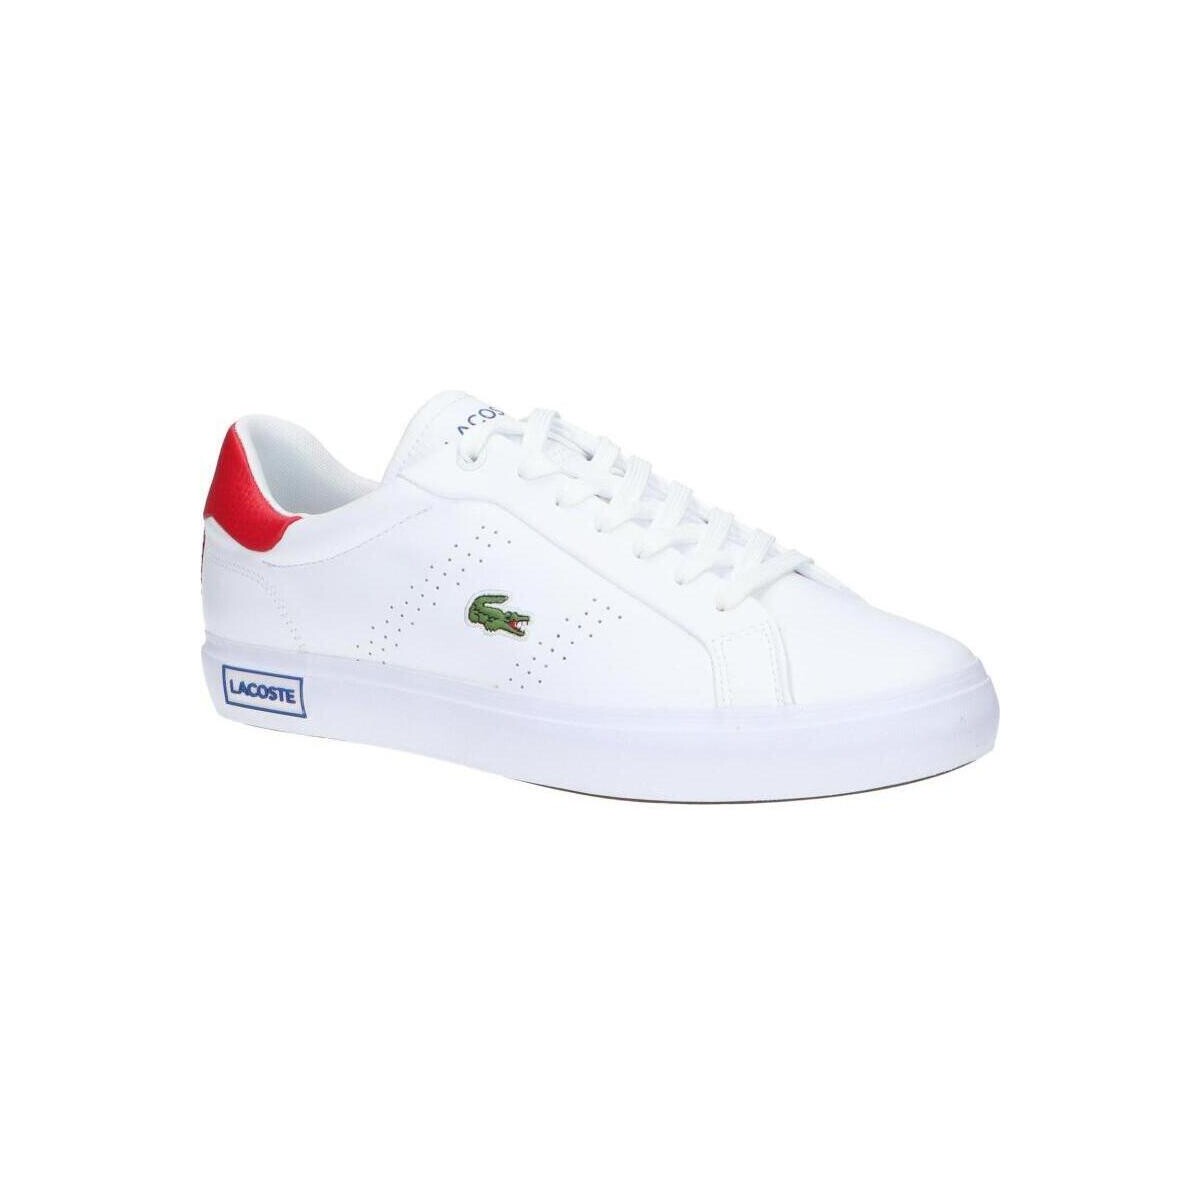 Chaussures Homme Multisport Lacoste 47SMA0083 POWERCOURT 2 0 47SMA0083 POWERCOURT 2 0 